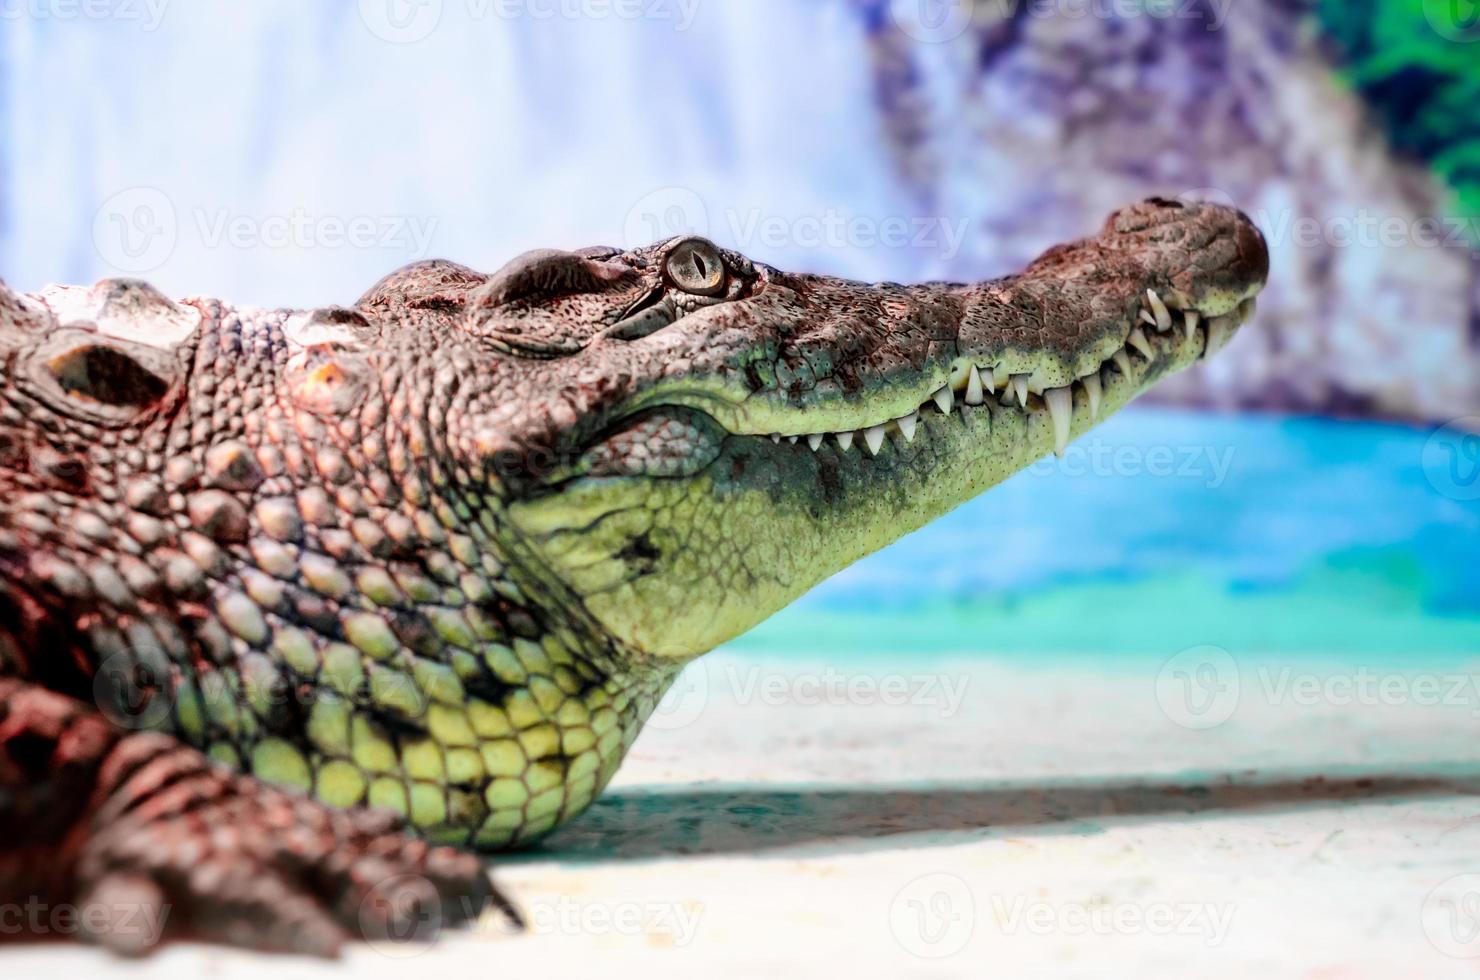 Big crocodile head with toothy mouth and green eyes close up photo